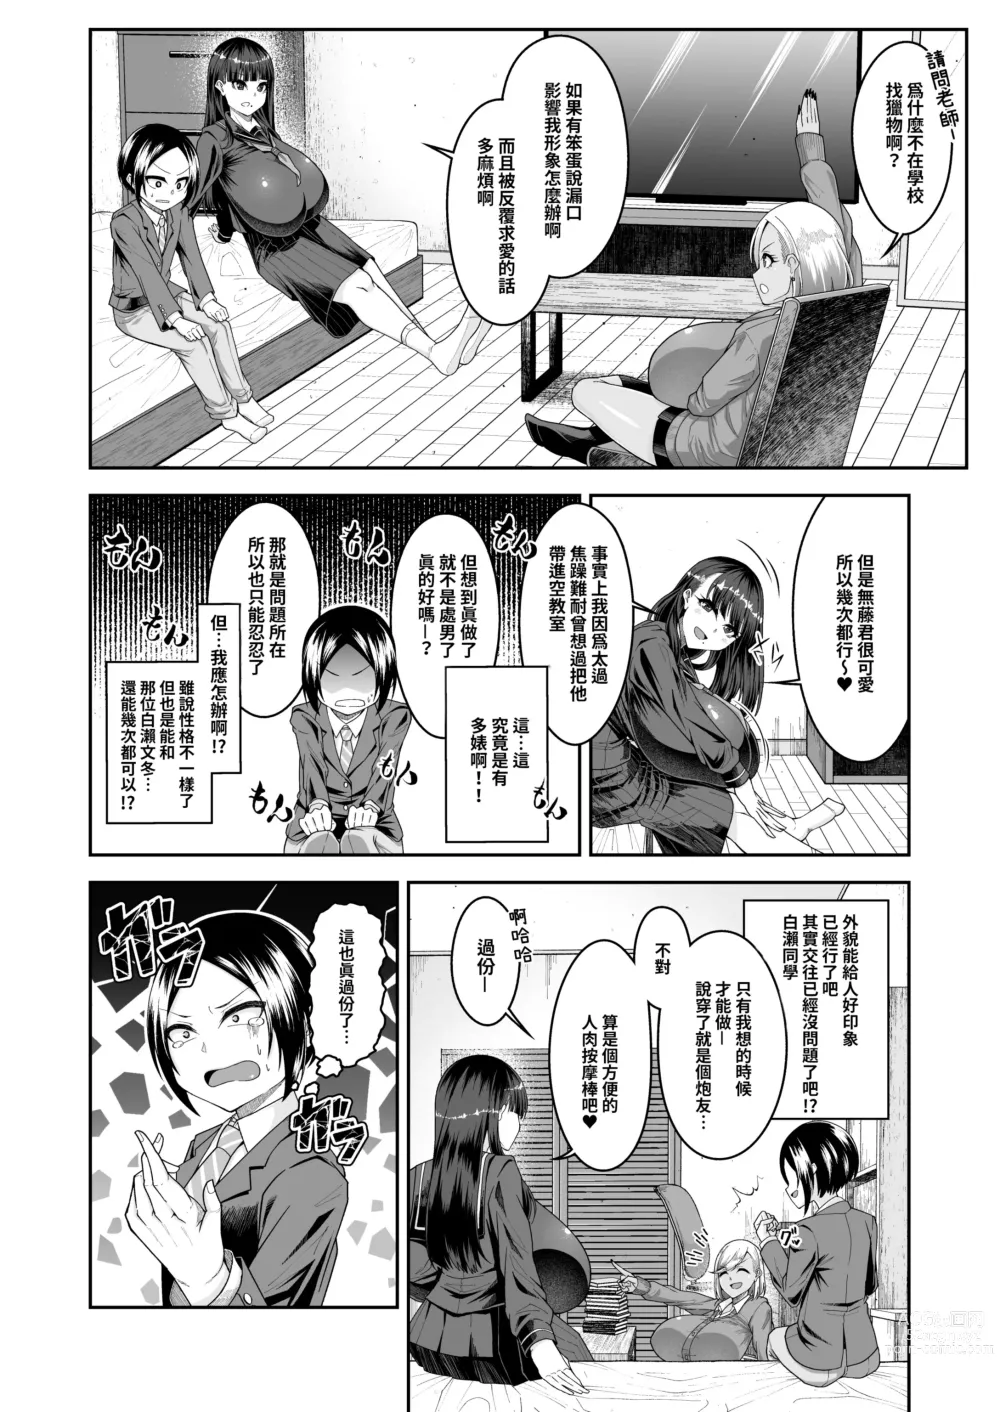 Page 9 of doujinshi 白肉的軟棉與黑肉的軟彈